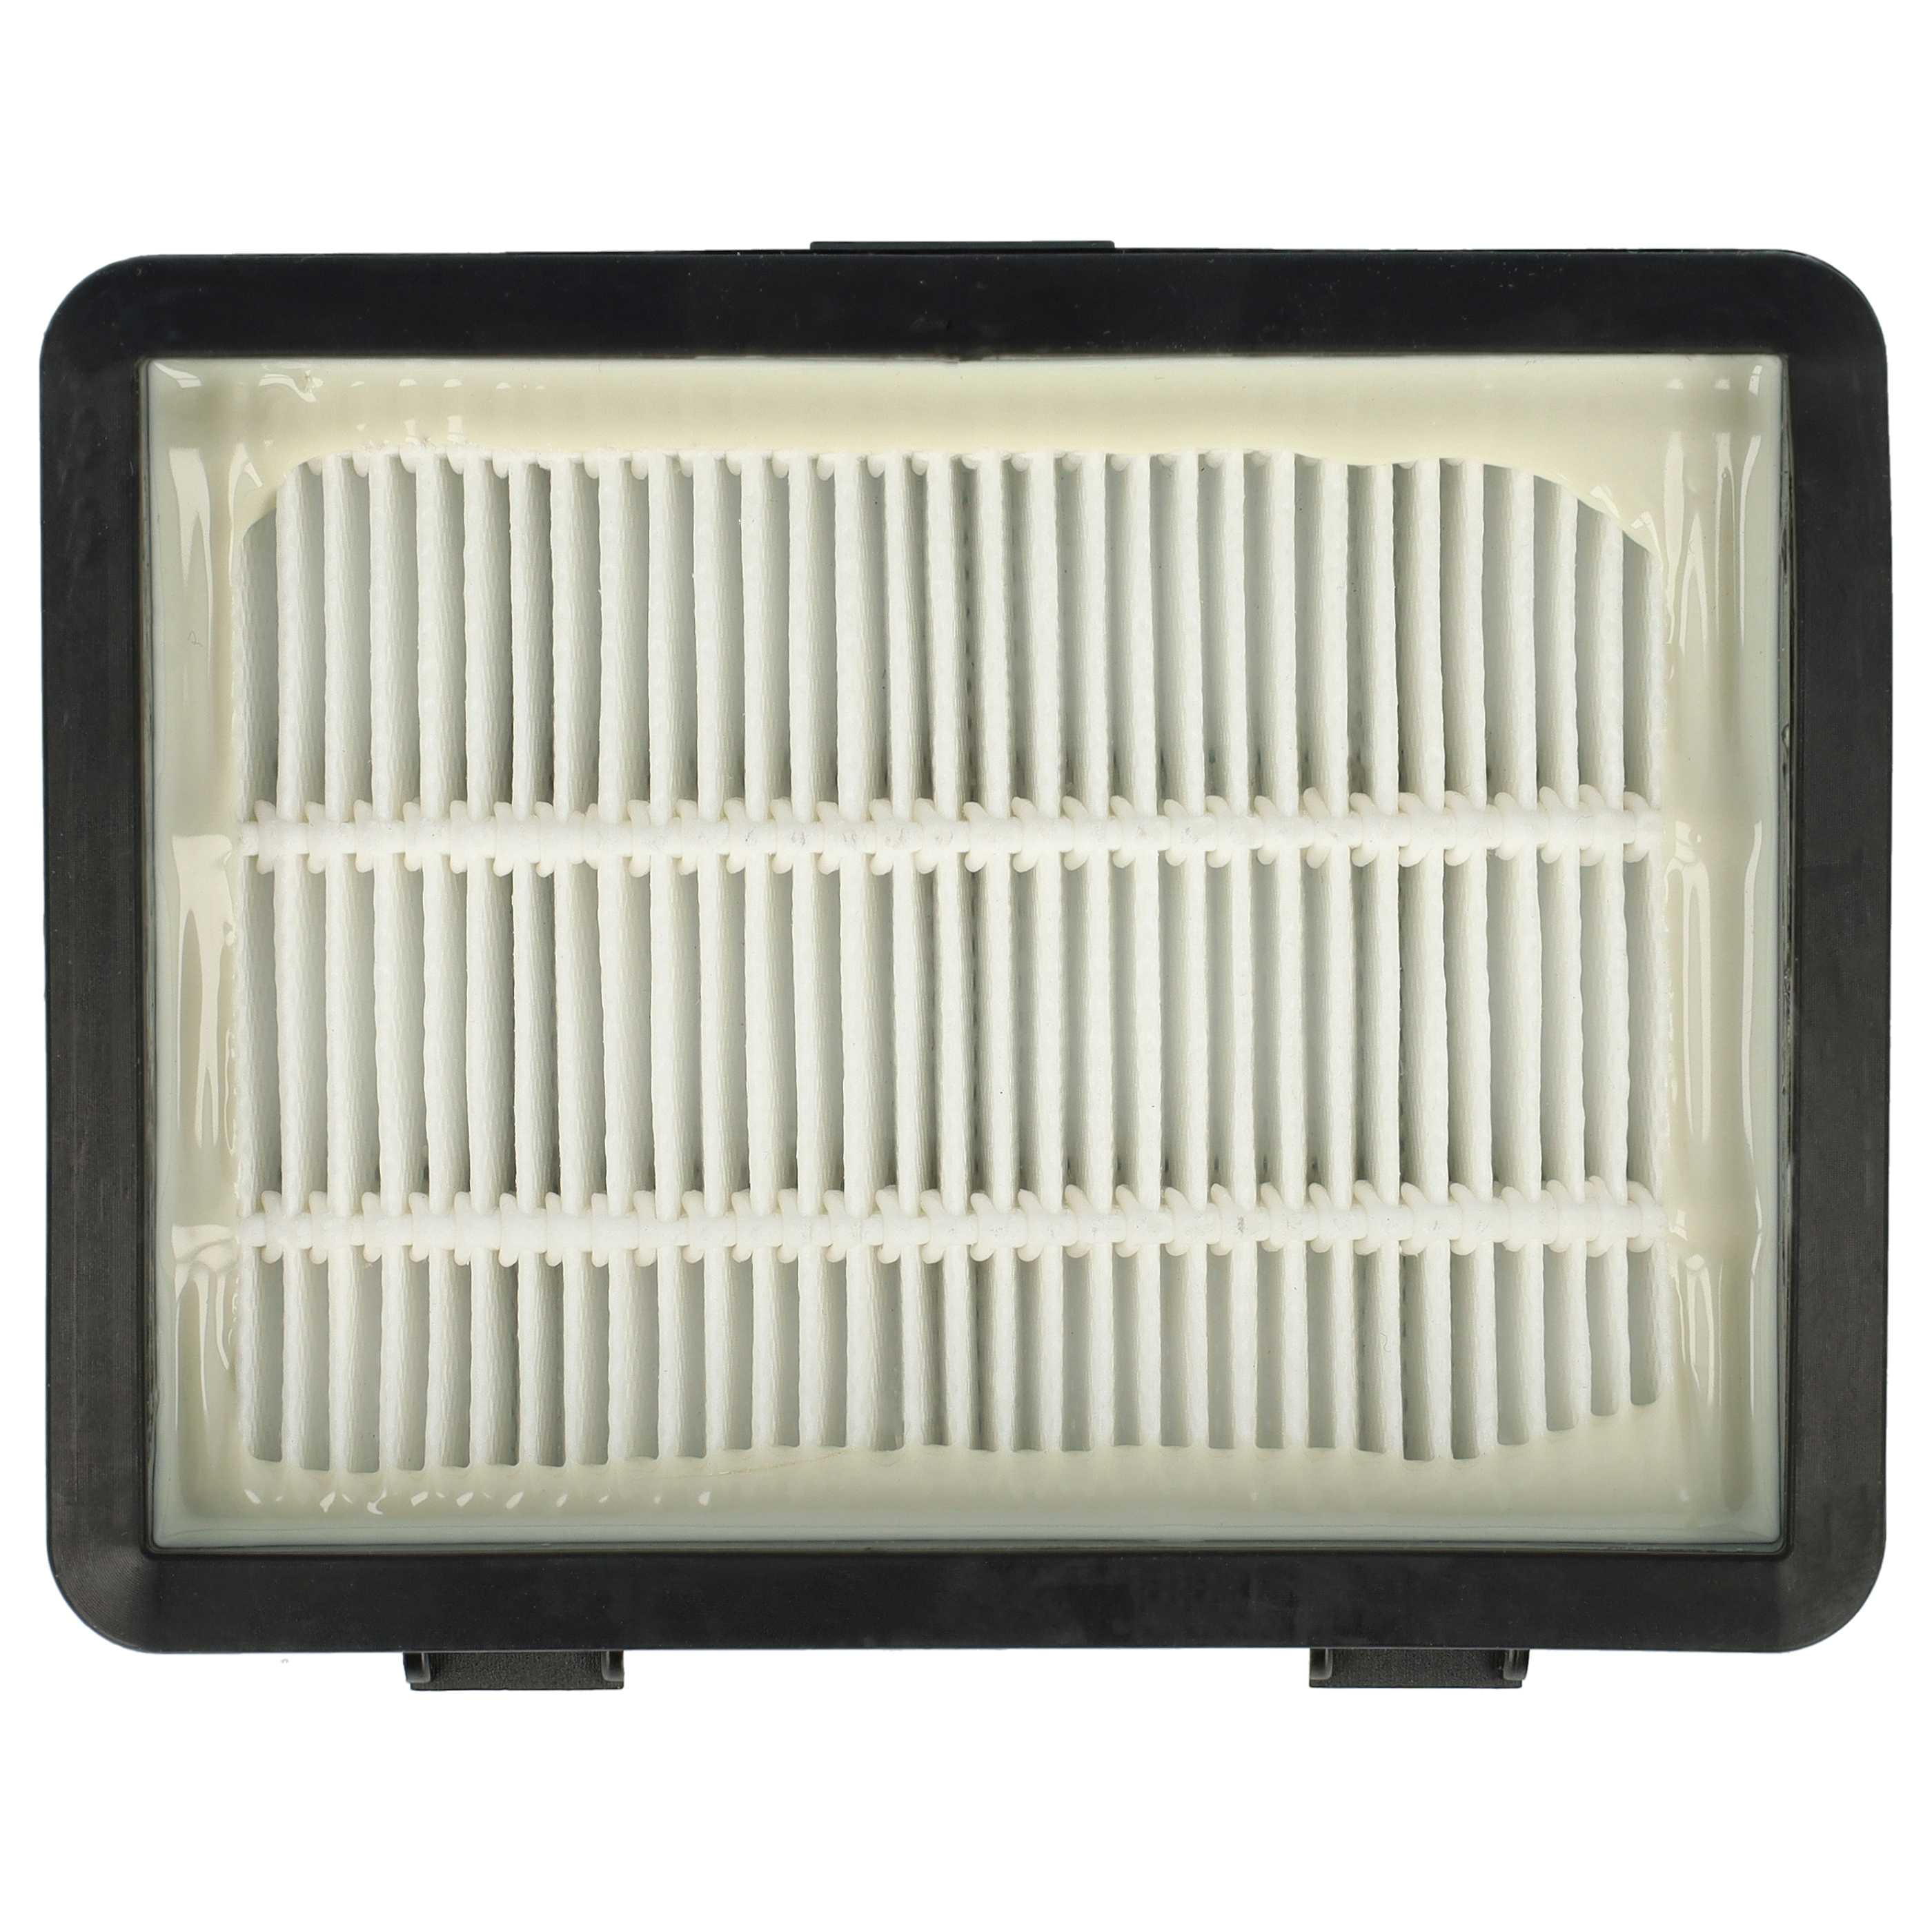 3x HEPA filter replaces Bosch 17001740 for Bosch Vacuum Cleaner